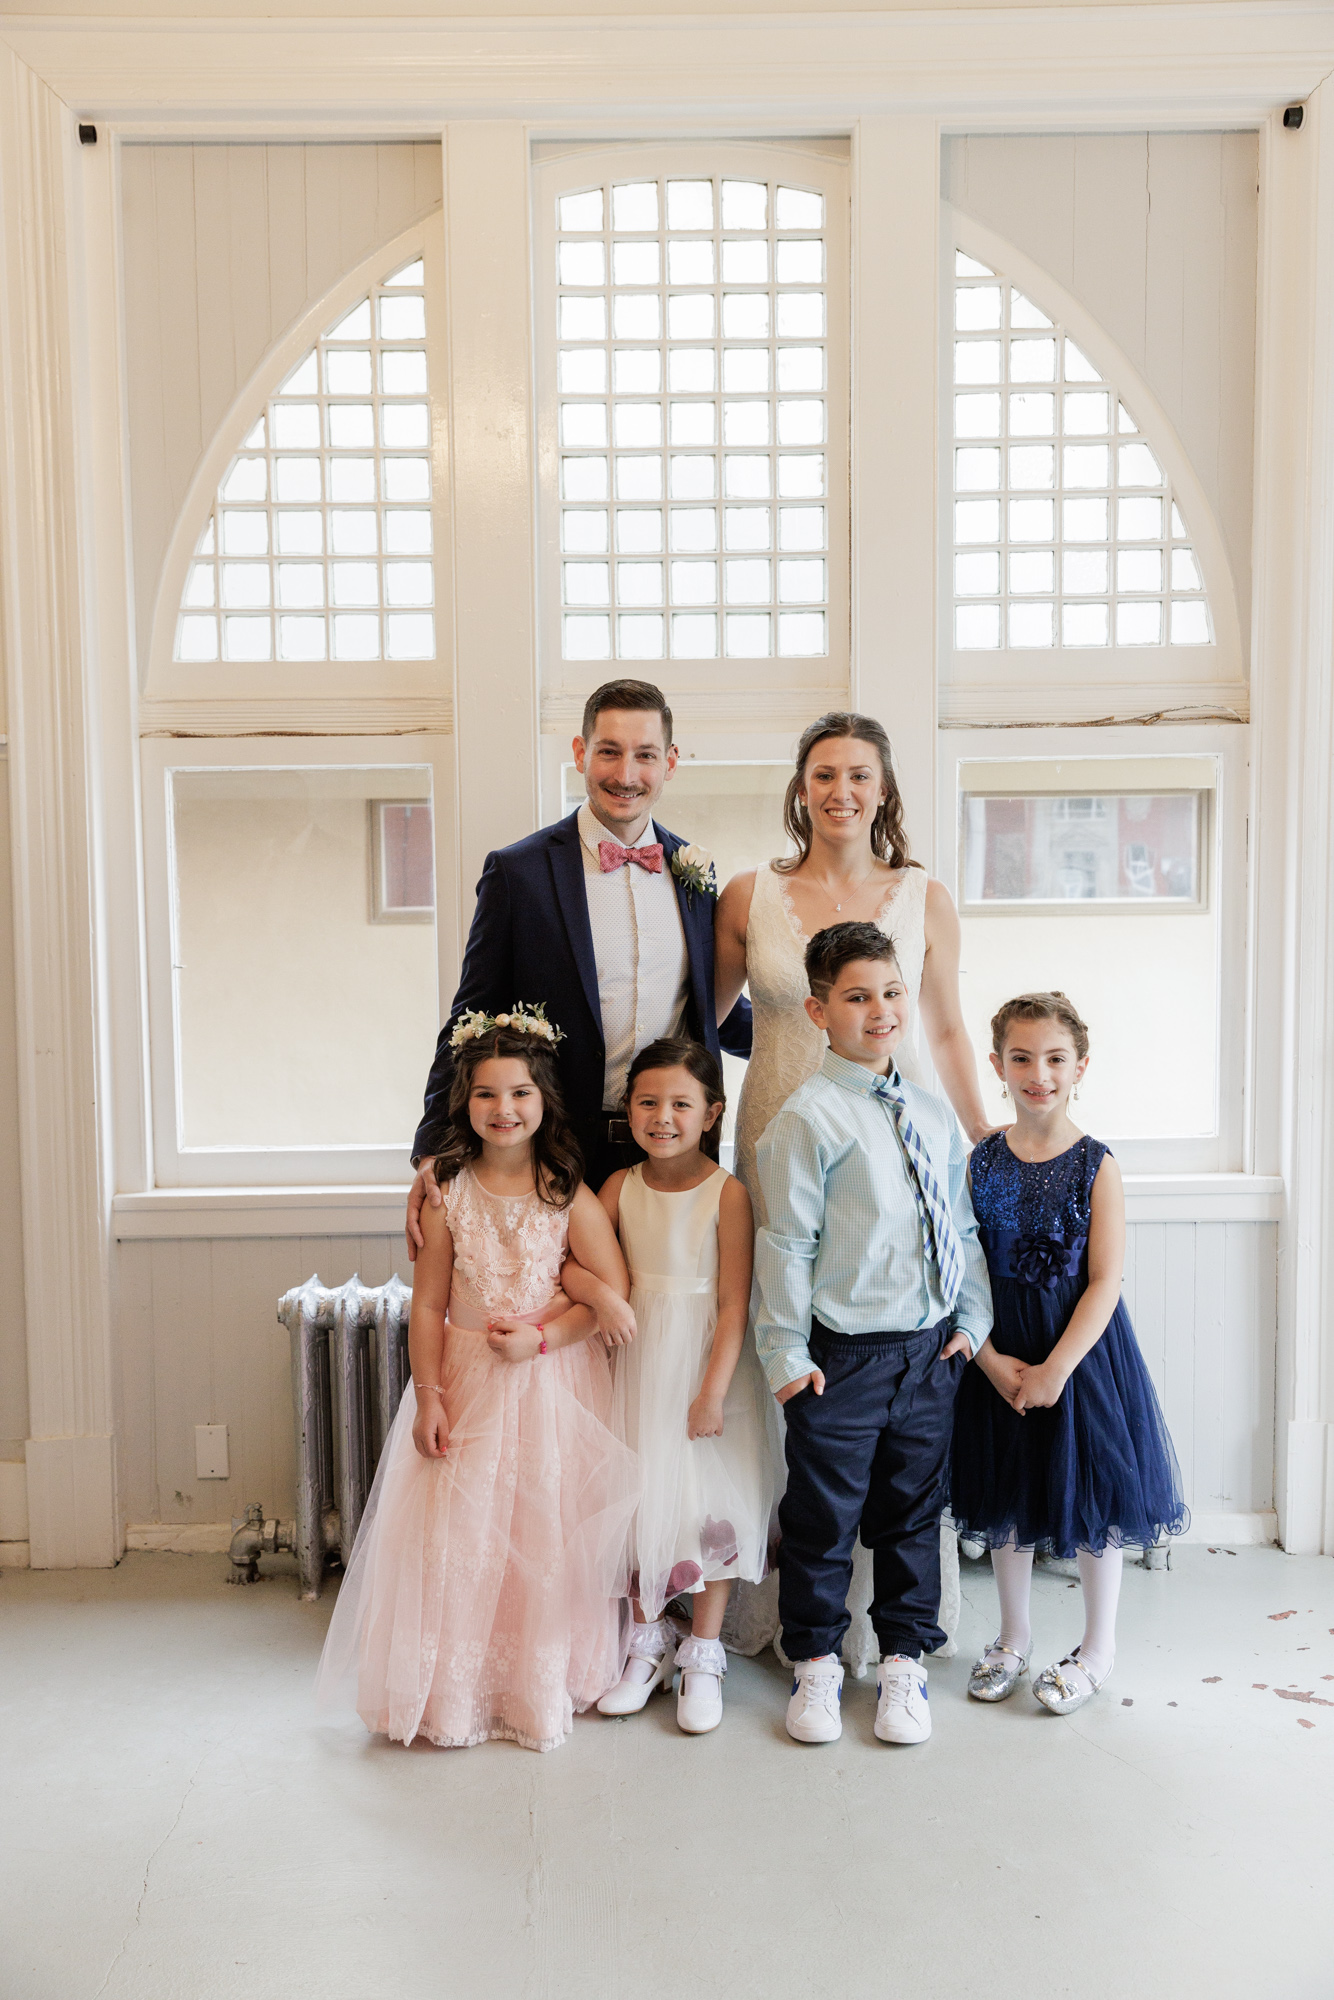 Bride and groom pose with four children from their wedding party after their wedding ceremony at Old City Hall in Bordentown, NJ